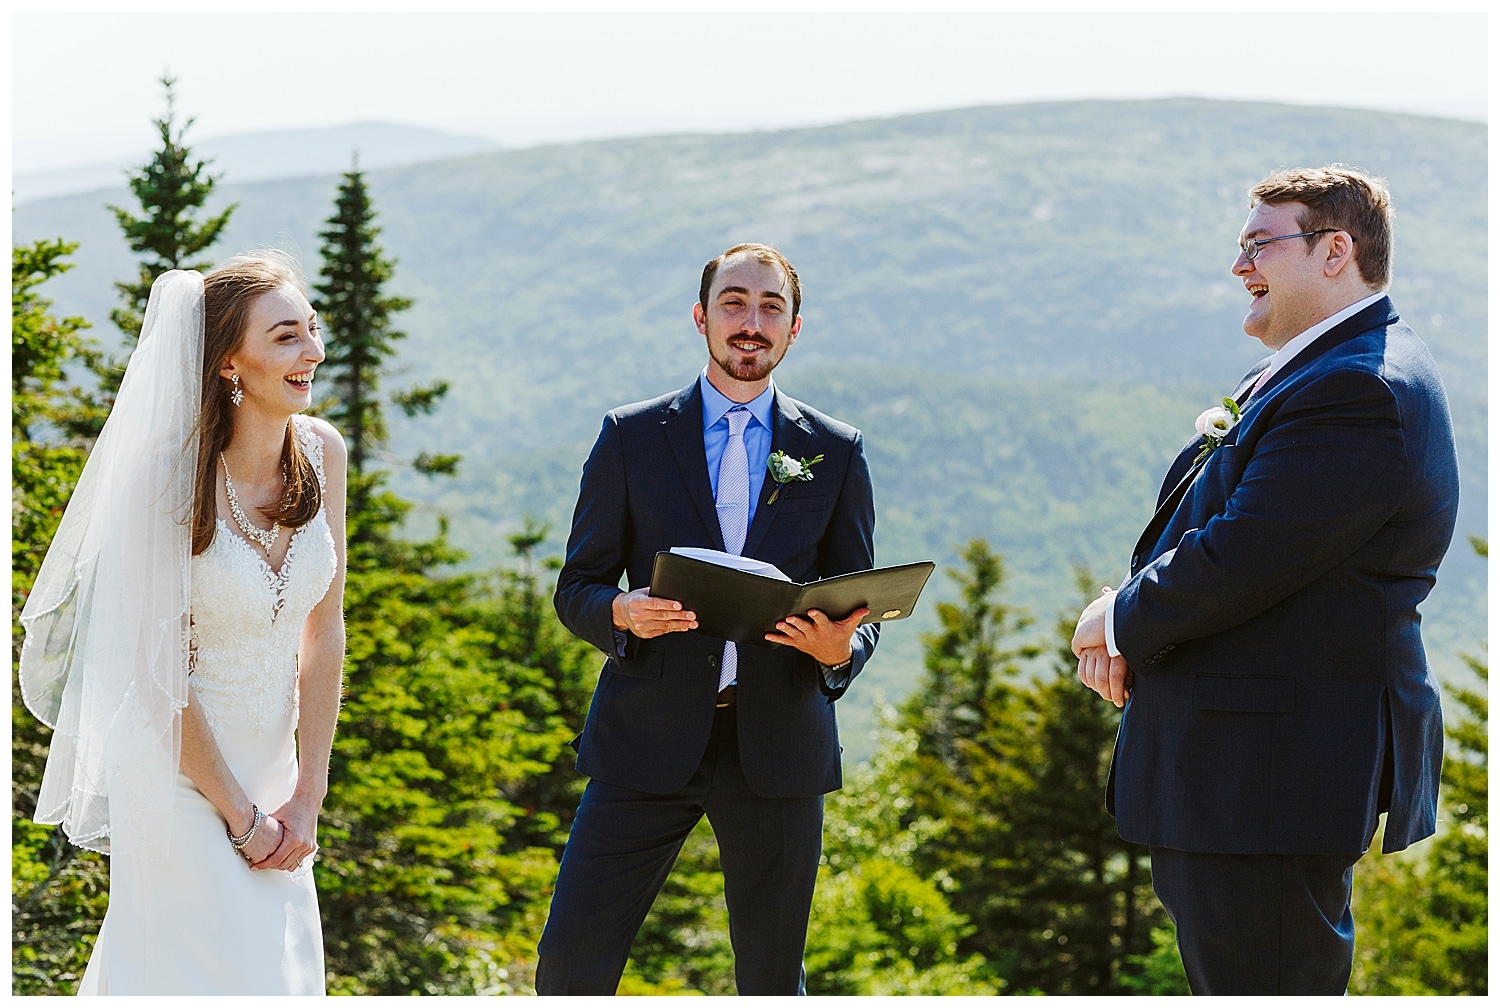 ceremony at Blue Hill Overlook during elopement in Acadia National Park